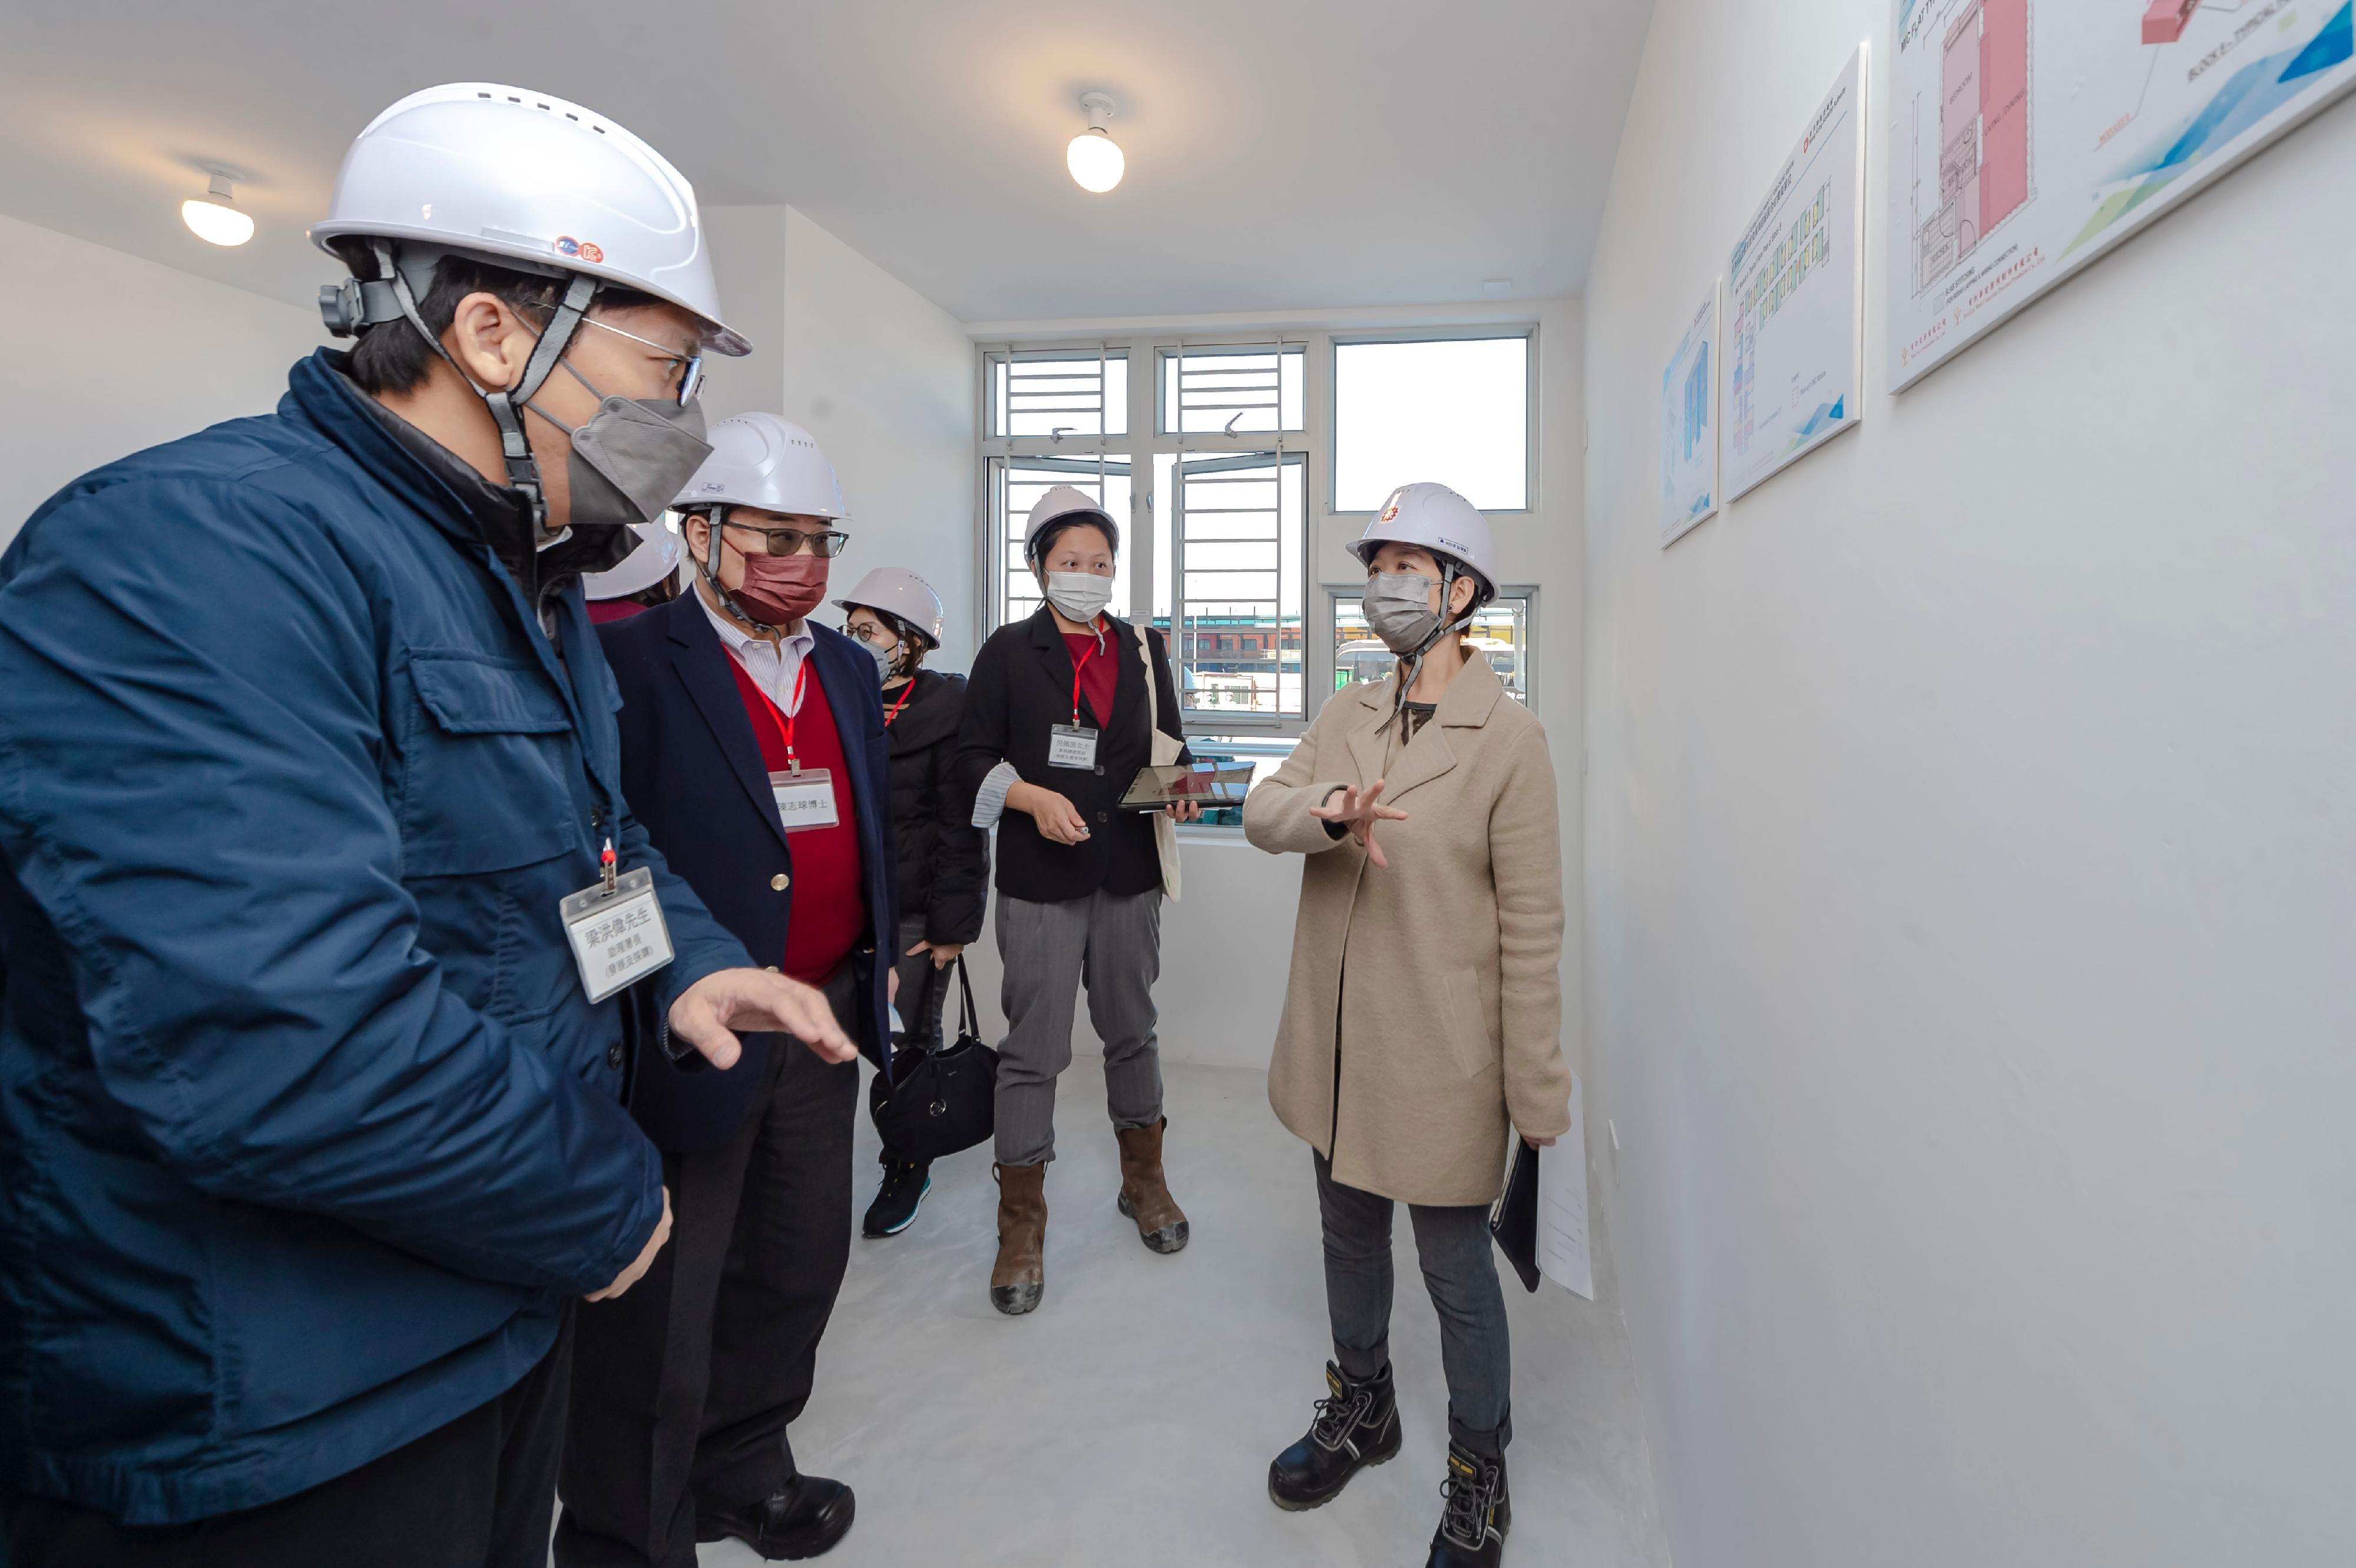 The Hong Kong Housing Authority (HA) arranged a media visit to the Modular Integrated Construction (MiC) mock-up for the public housing development at Tung Chung Area 99 today (March 31). Photo shows the Secretary for Housing cum HA Chairman, Ms Winnie Ho (first right), and HA members inspecting the interior of the MiC mock-up earlier.



